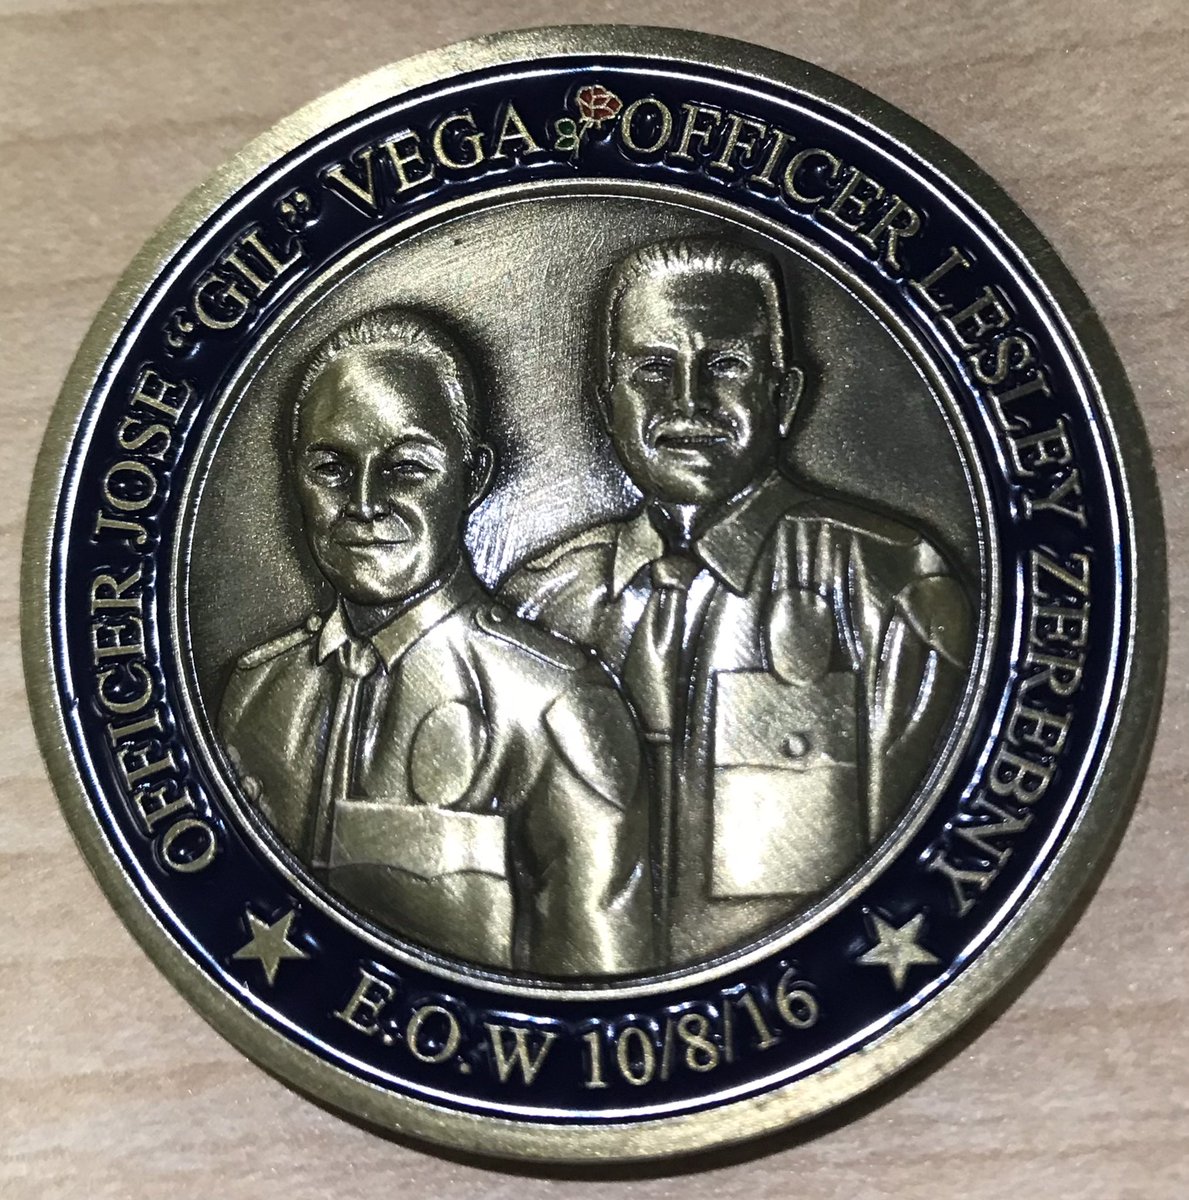 New Challenge Coins Honoring Officers Lesley Zerebny and Jose ‘Gil’ Vega are now available at our Village Fest Booth on Thursdays.